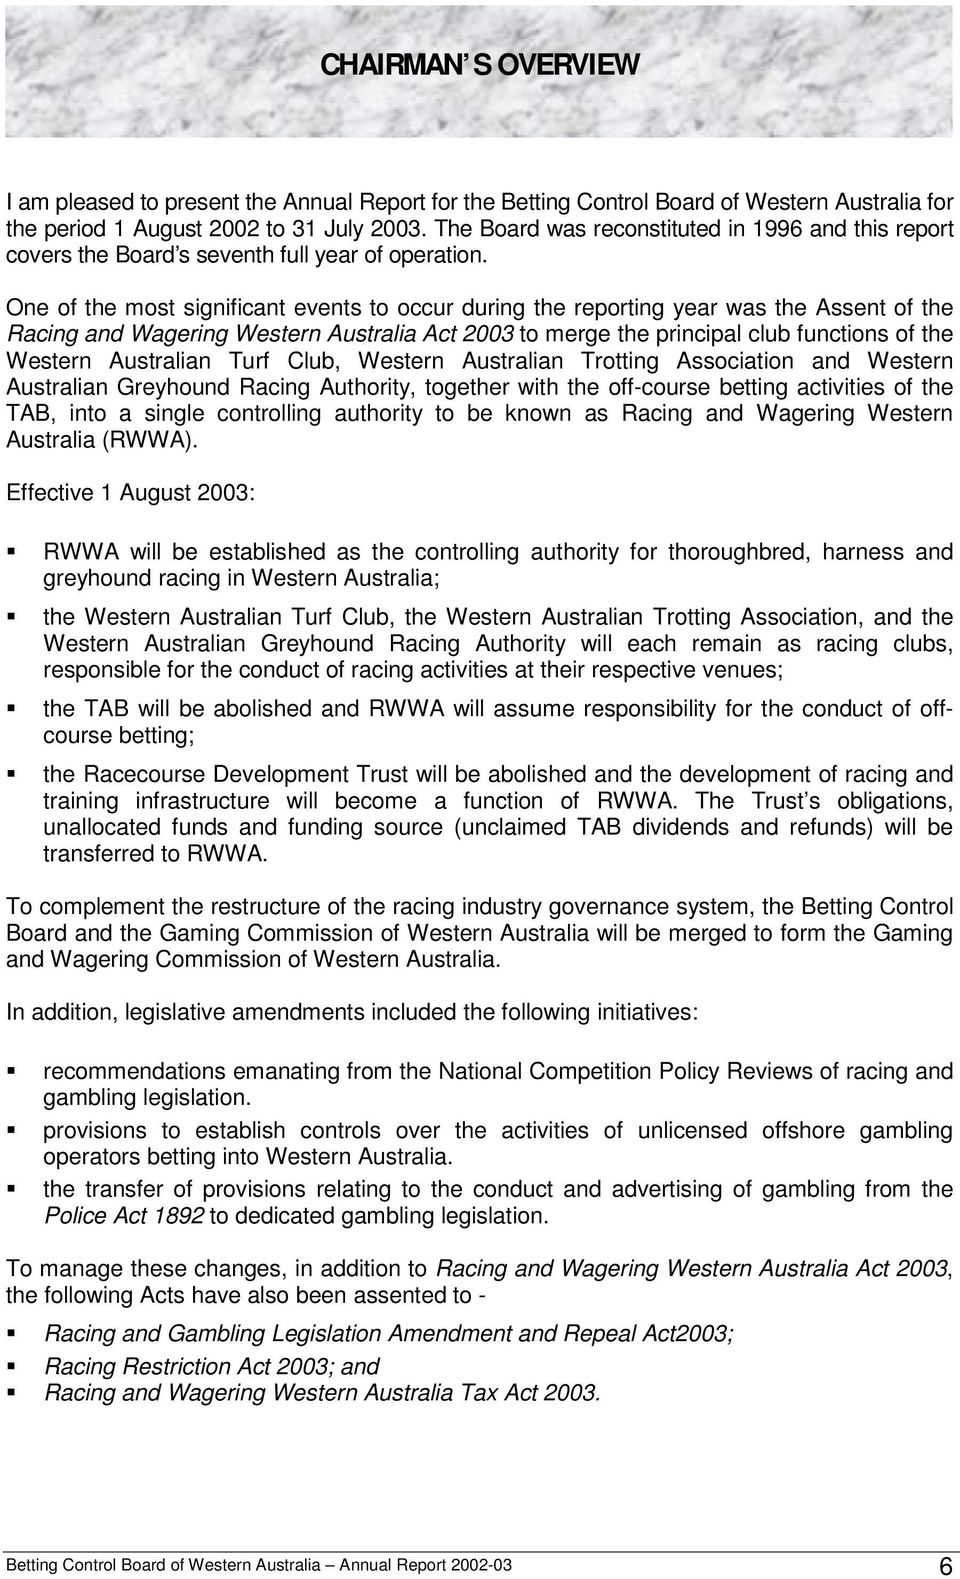 One of the most significant events to occur during the reporting year was the Assent of the Racing and Wagering Western Australia Act 2003 to merge the principal club functions of the Western